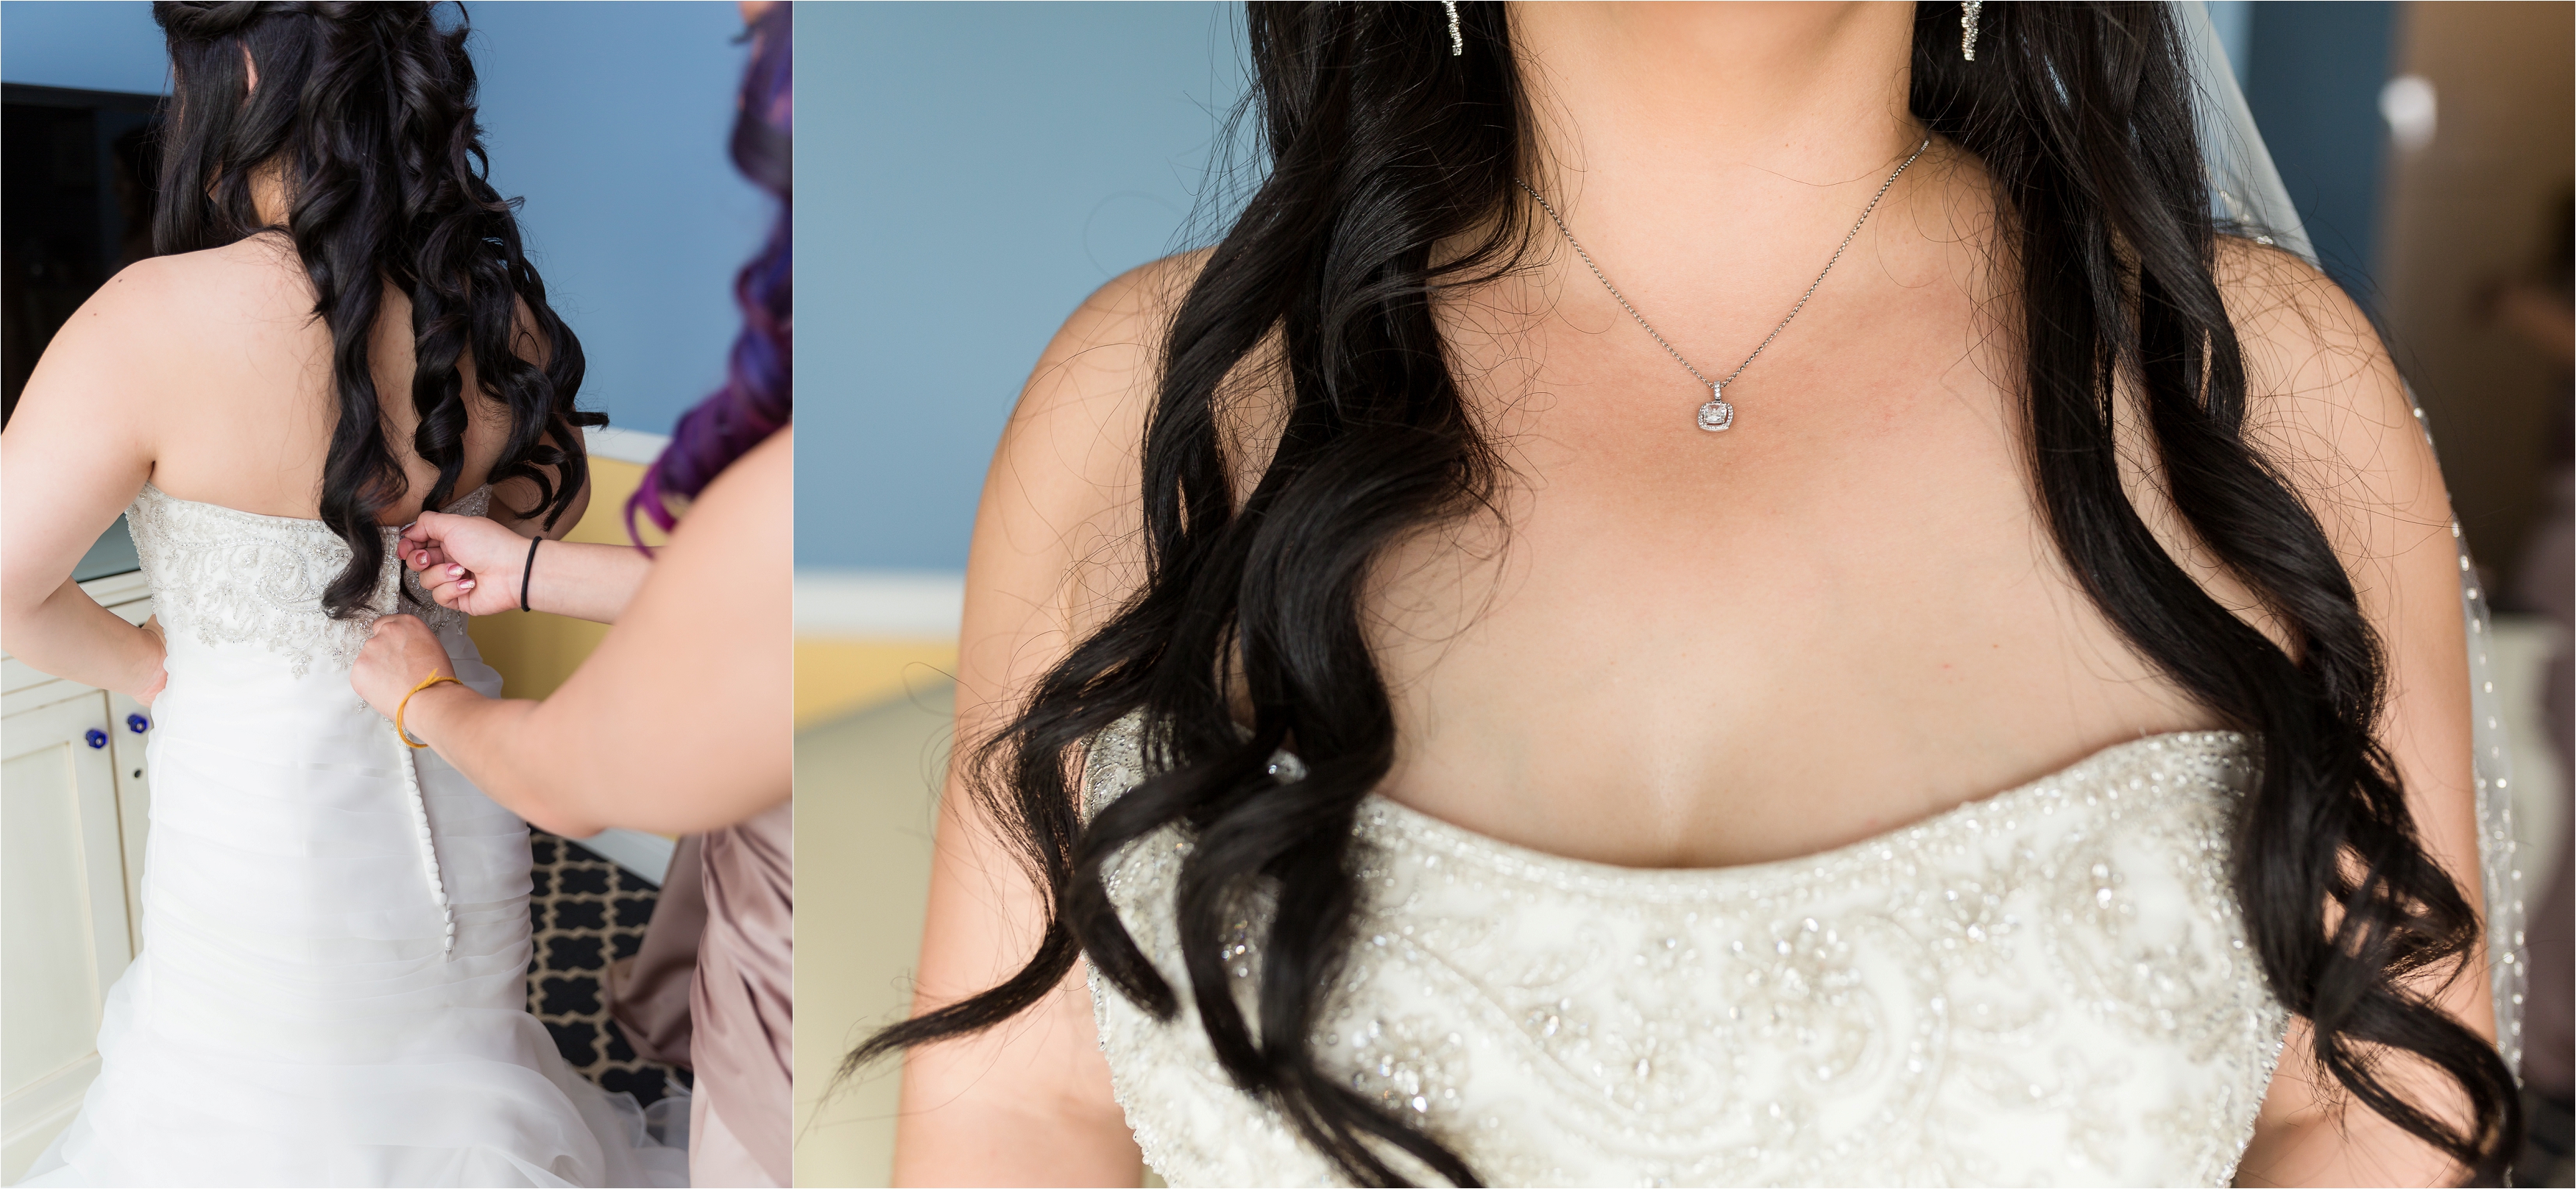 Wedding gown and necklace details